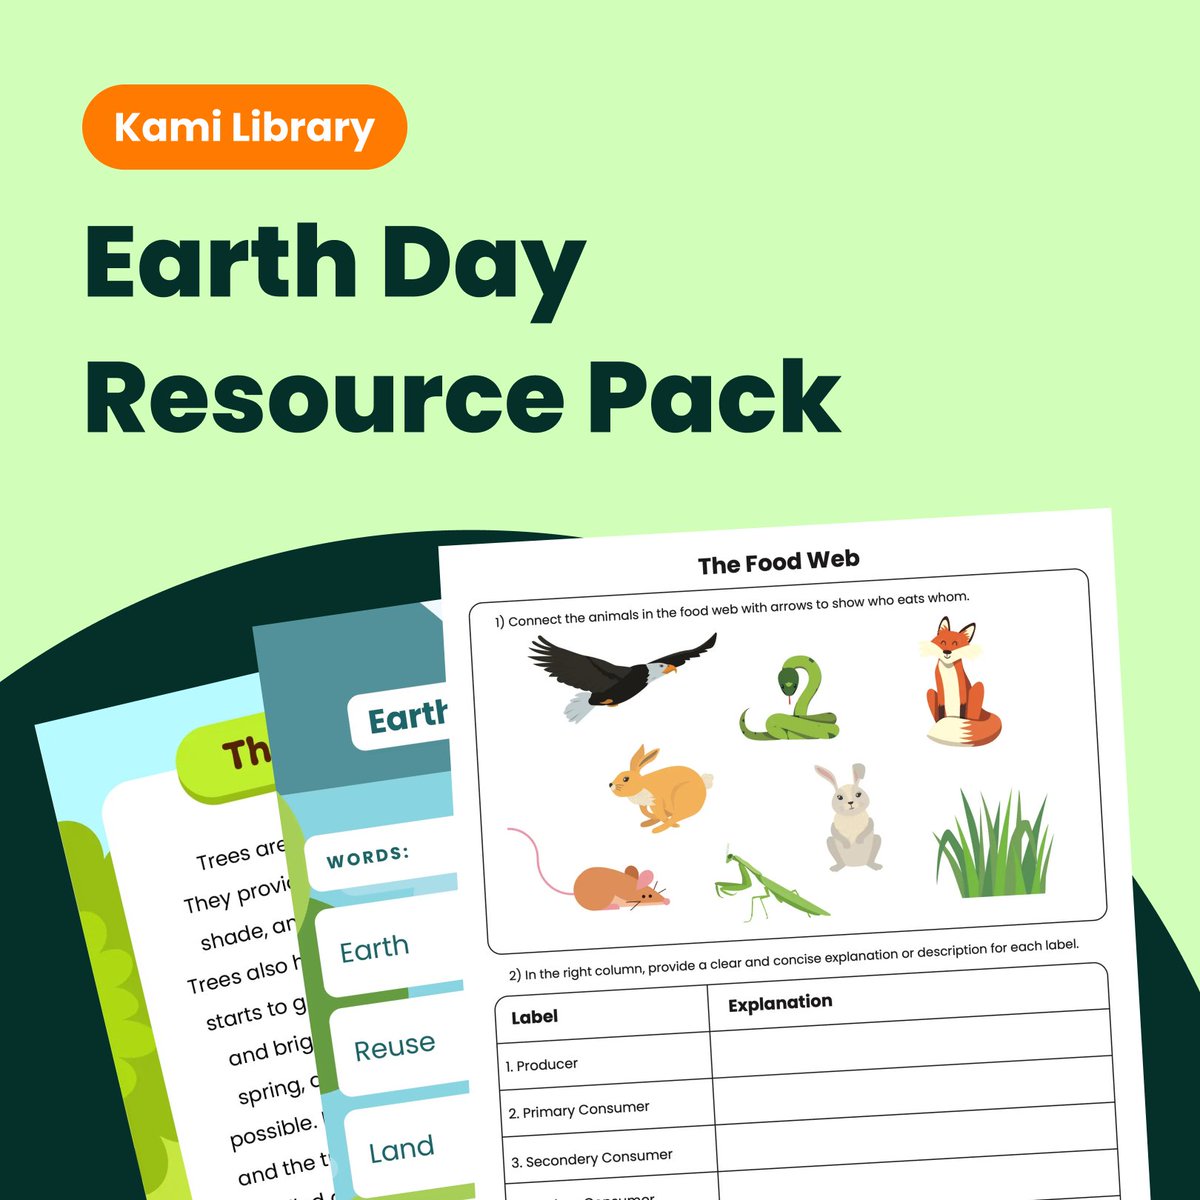 Earth Day is coming up! No need to recycle last year's content ♻️ Check out our 2024 templates 🌎 kami.app/Earth-day-reso… Got an out-of-this-world activity prepped? 🚀 Share with the community in the replies! 👇 #EarthDay2024